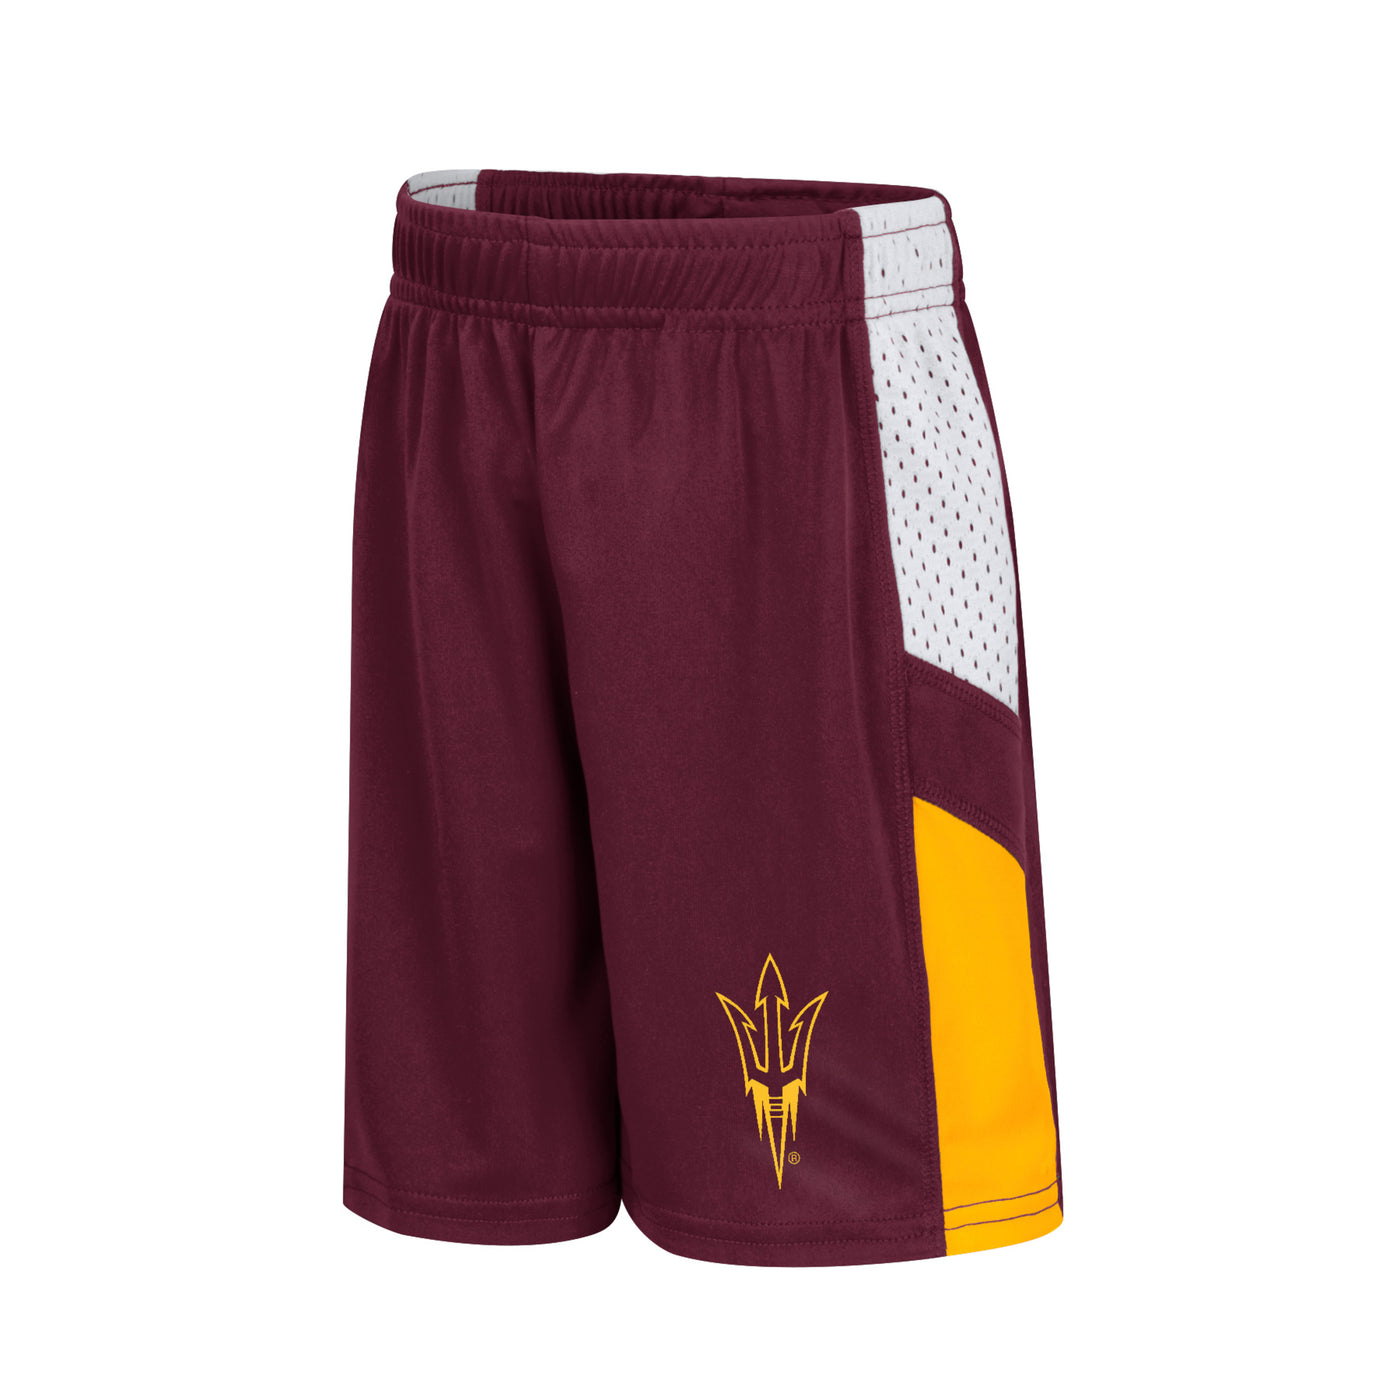 ASU maroon toddler shorts. Side panels are white mesh at the top, a diagonal maroon stripe, and gold on the bottom. On the front at bottom of the left leg is a gold pitchfork outline.  